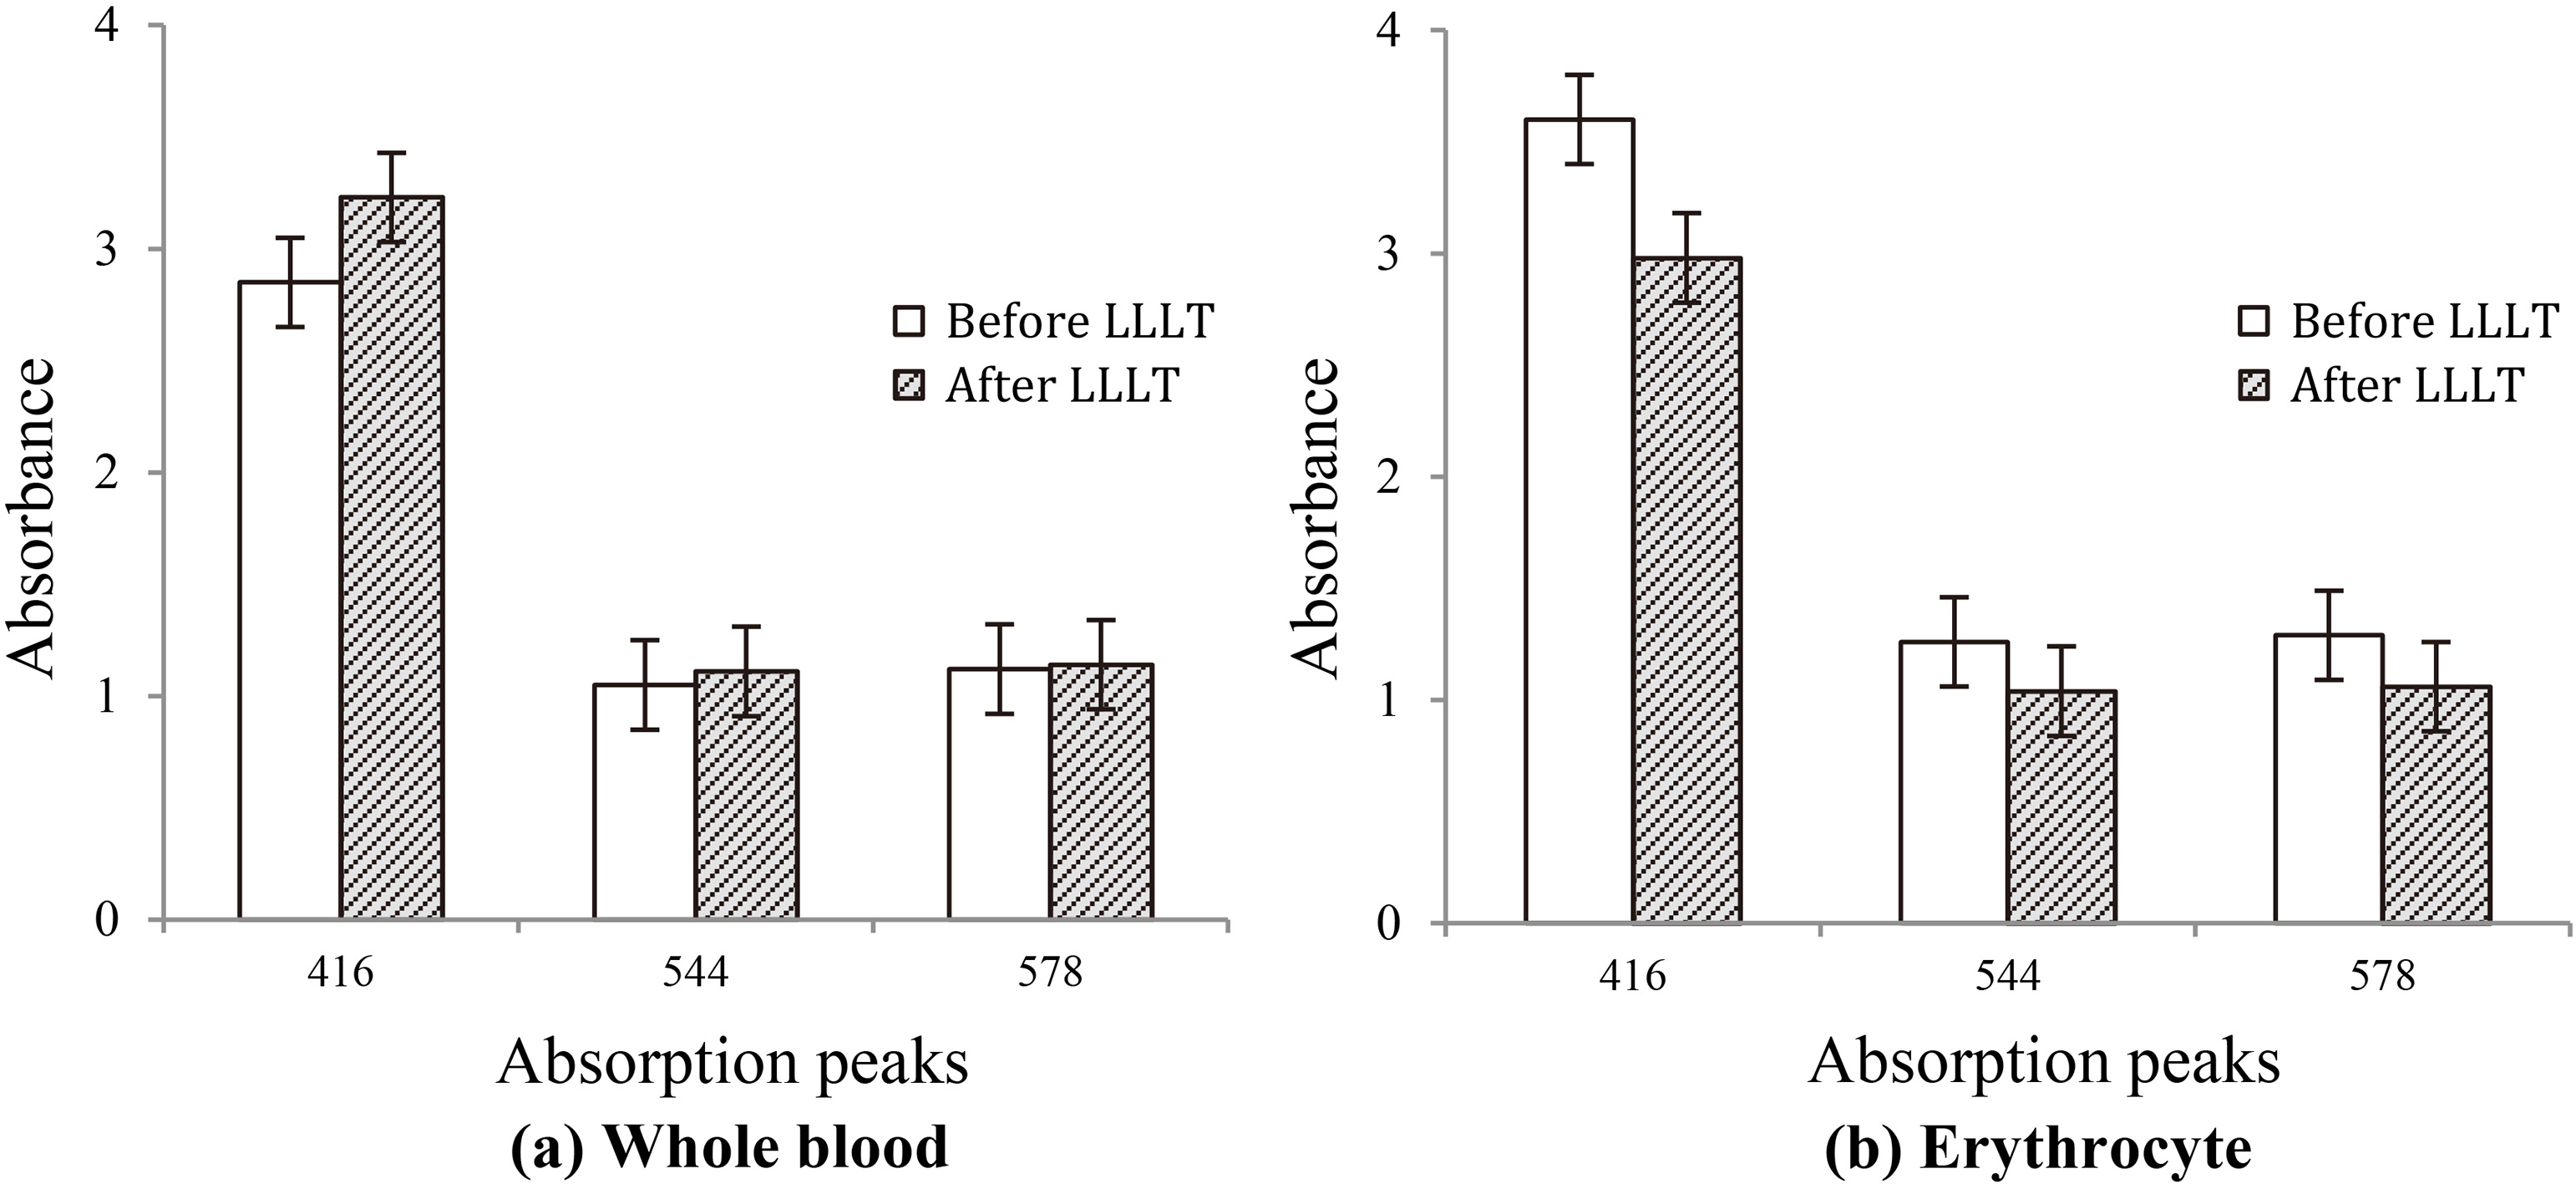 The absorbance of main absorption peaks (416 nm, 544 nm, 578 nm) before and after LLLT (a) the whole blood sample (b) the erythrocyte sample.